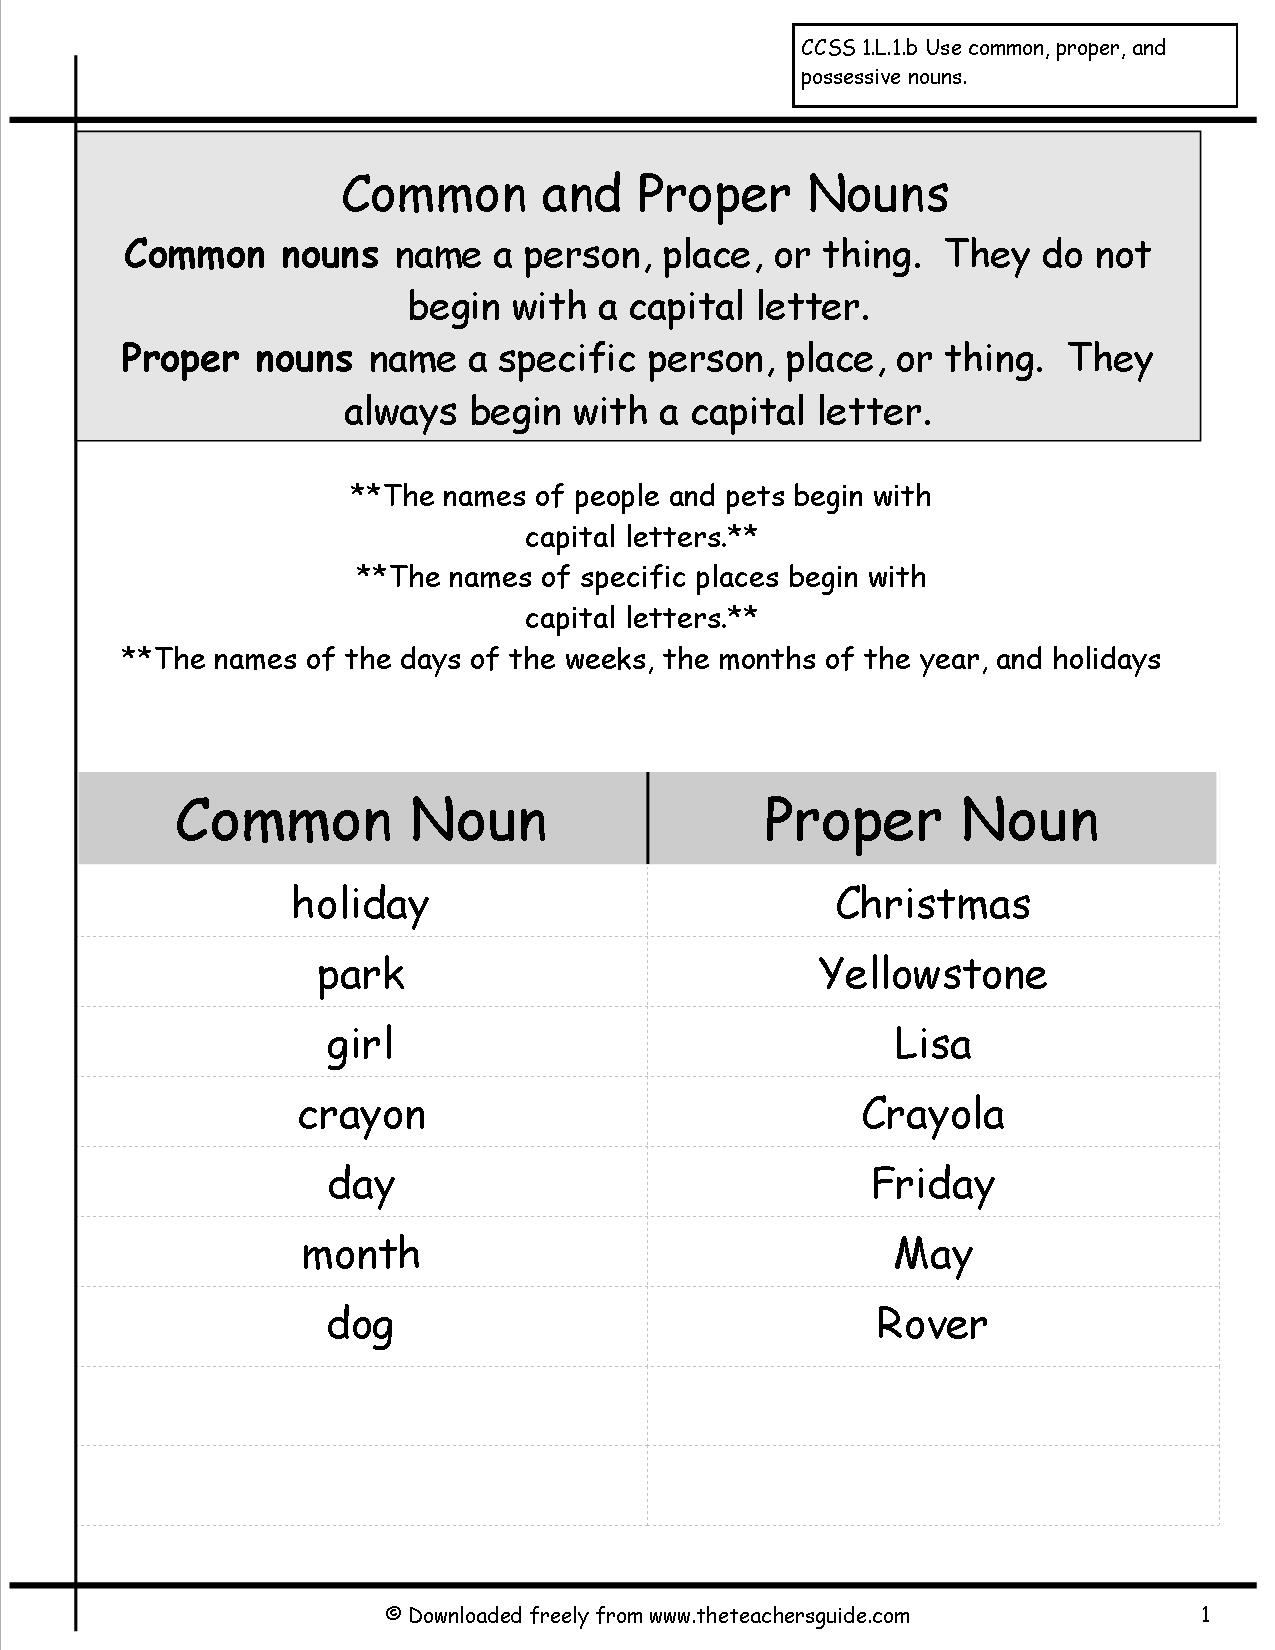 Common Proper Noun Worksheet The Wise Son Story Answer